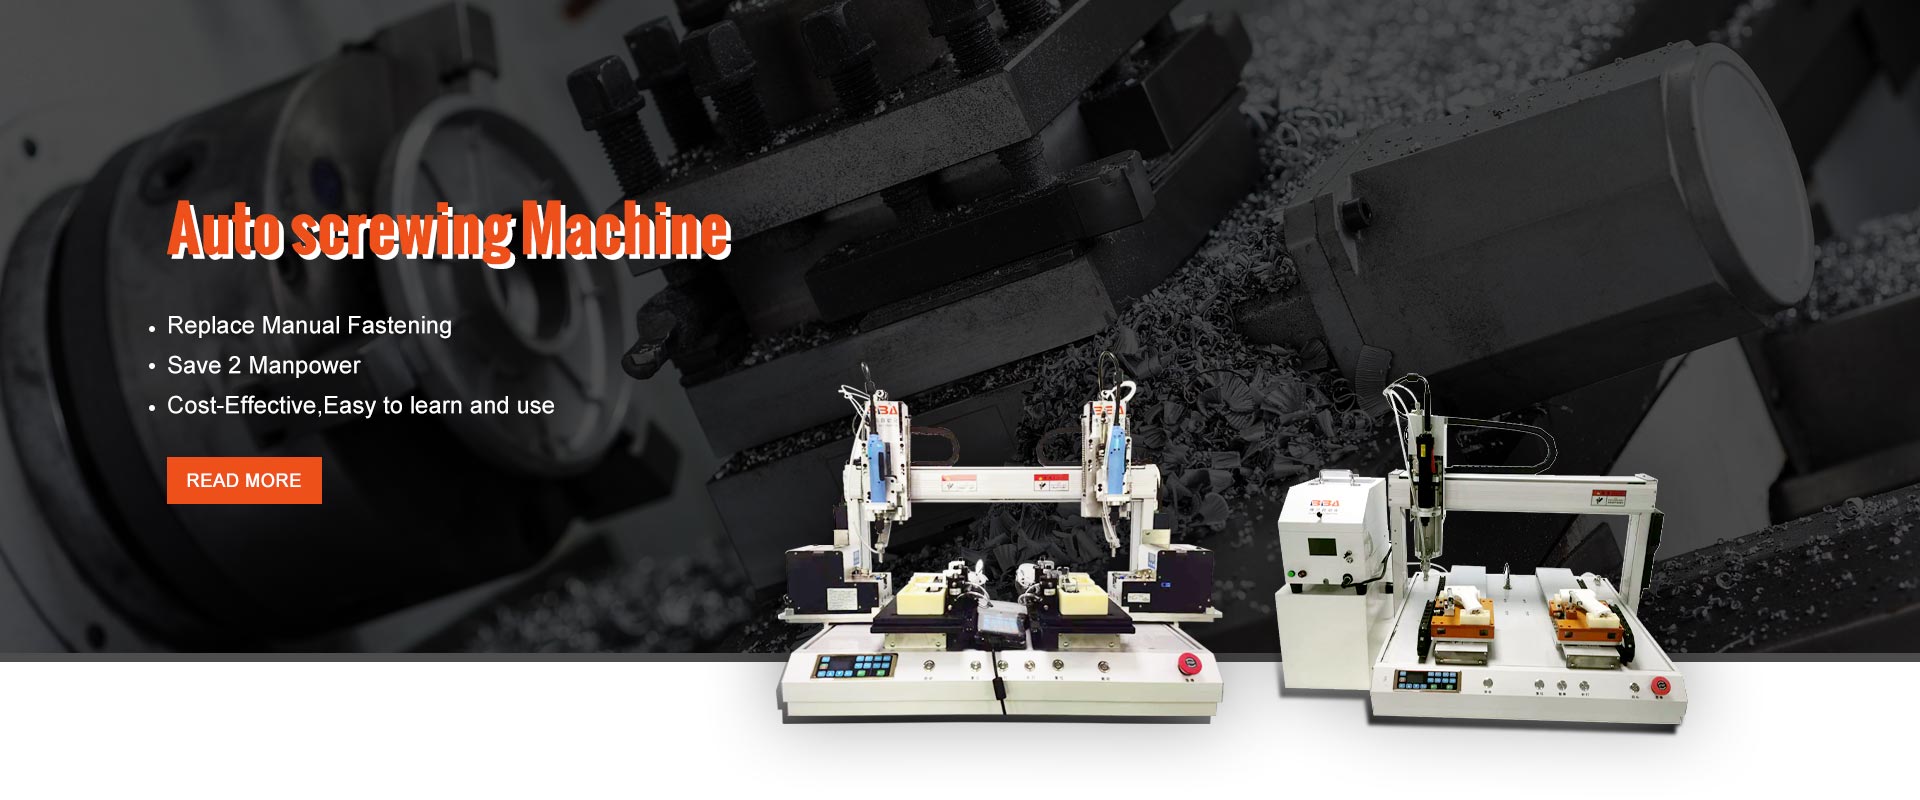 Component lead clipping machine